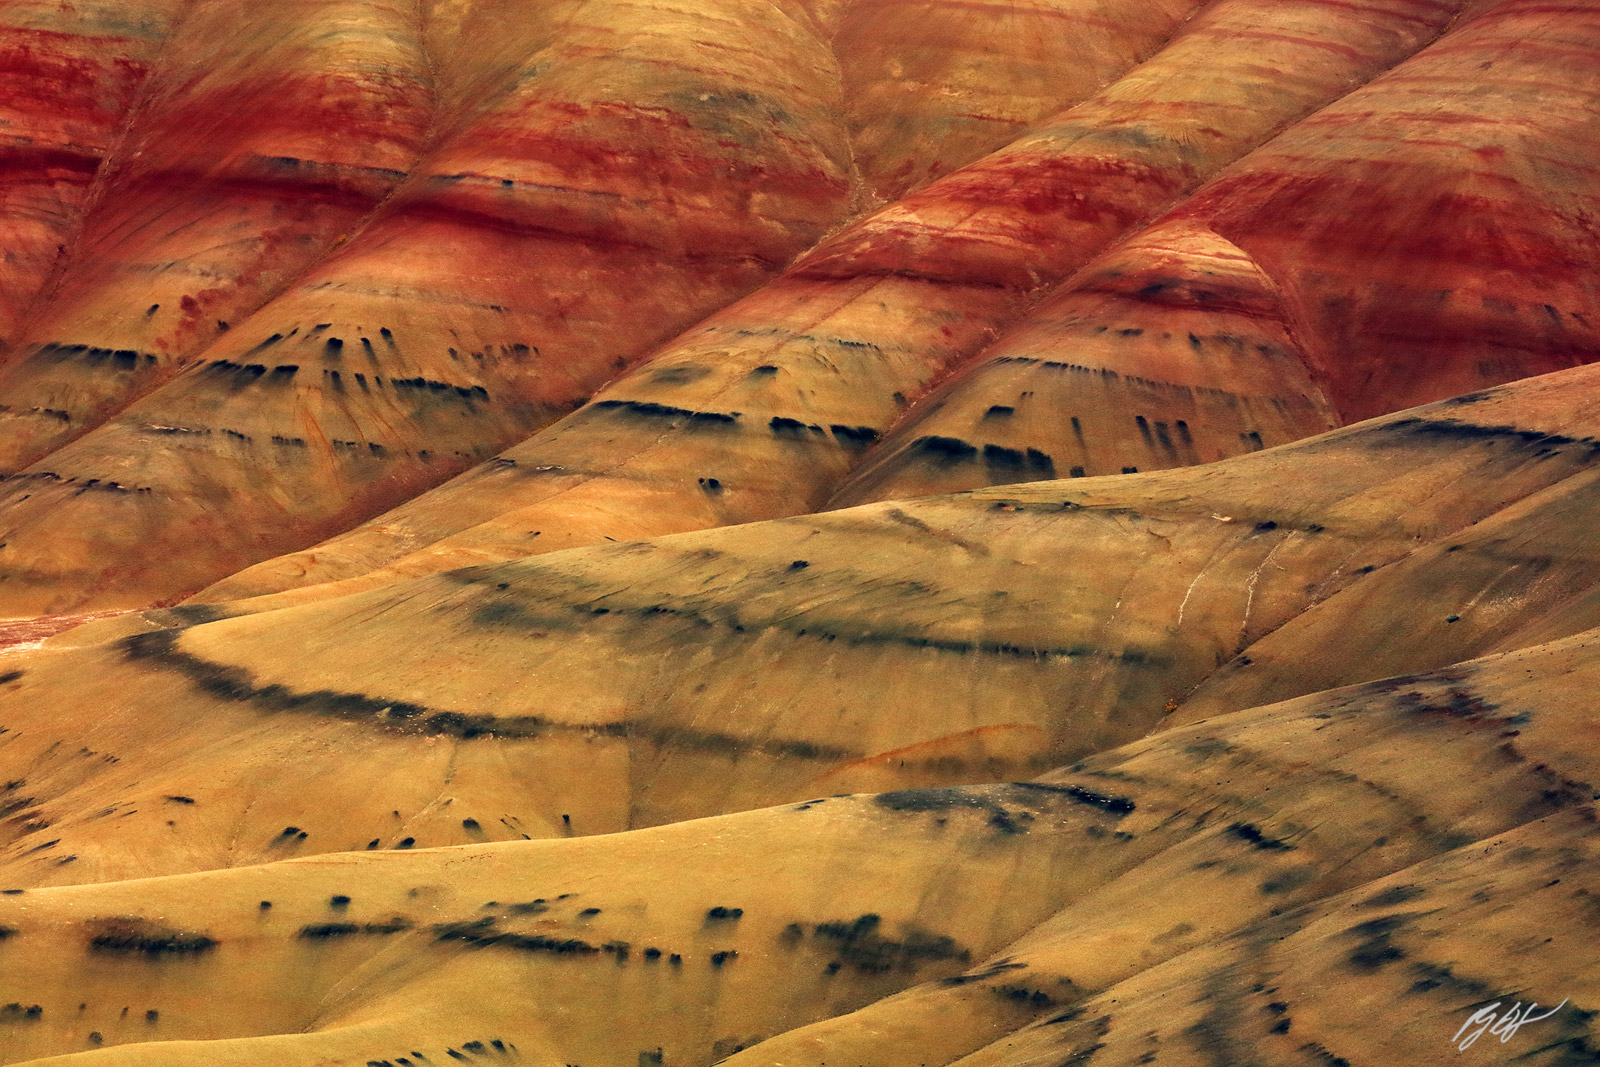 Colors of the Painted Hills, John Day Fossil Beds National Monument in Oregon